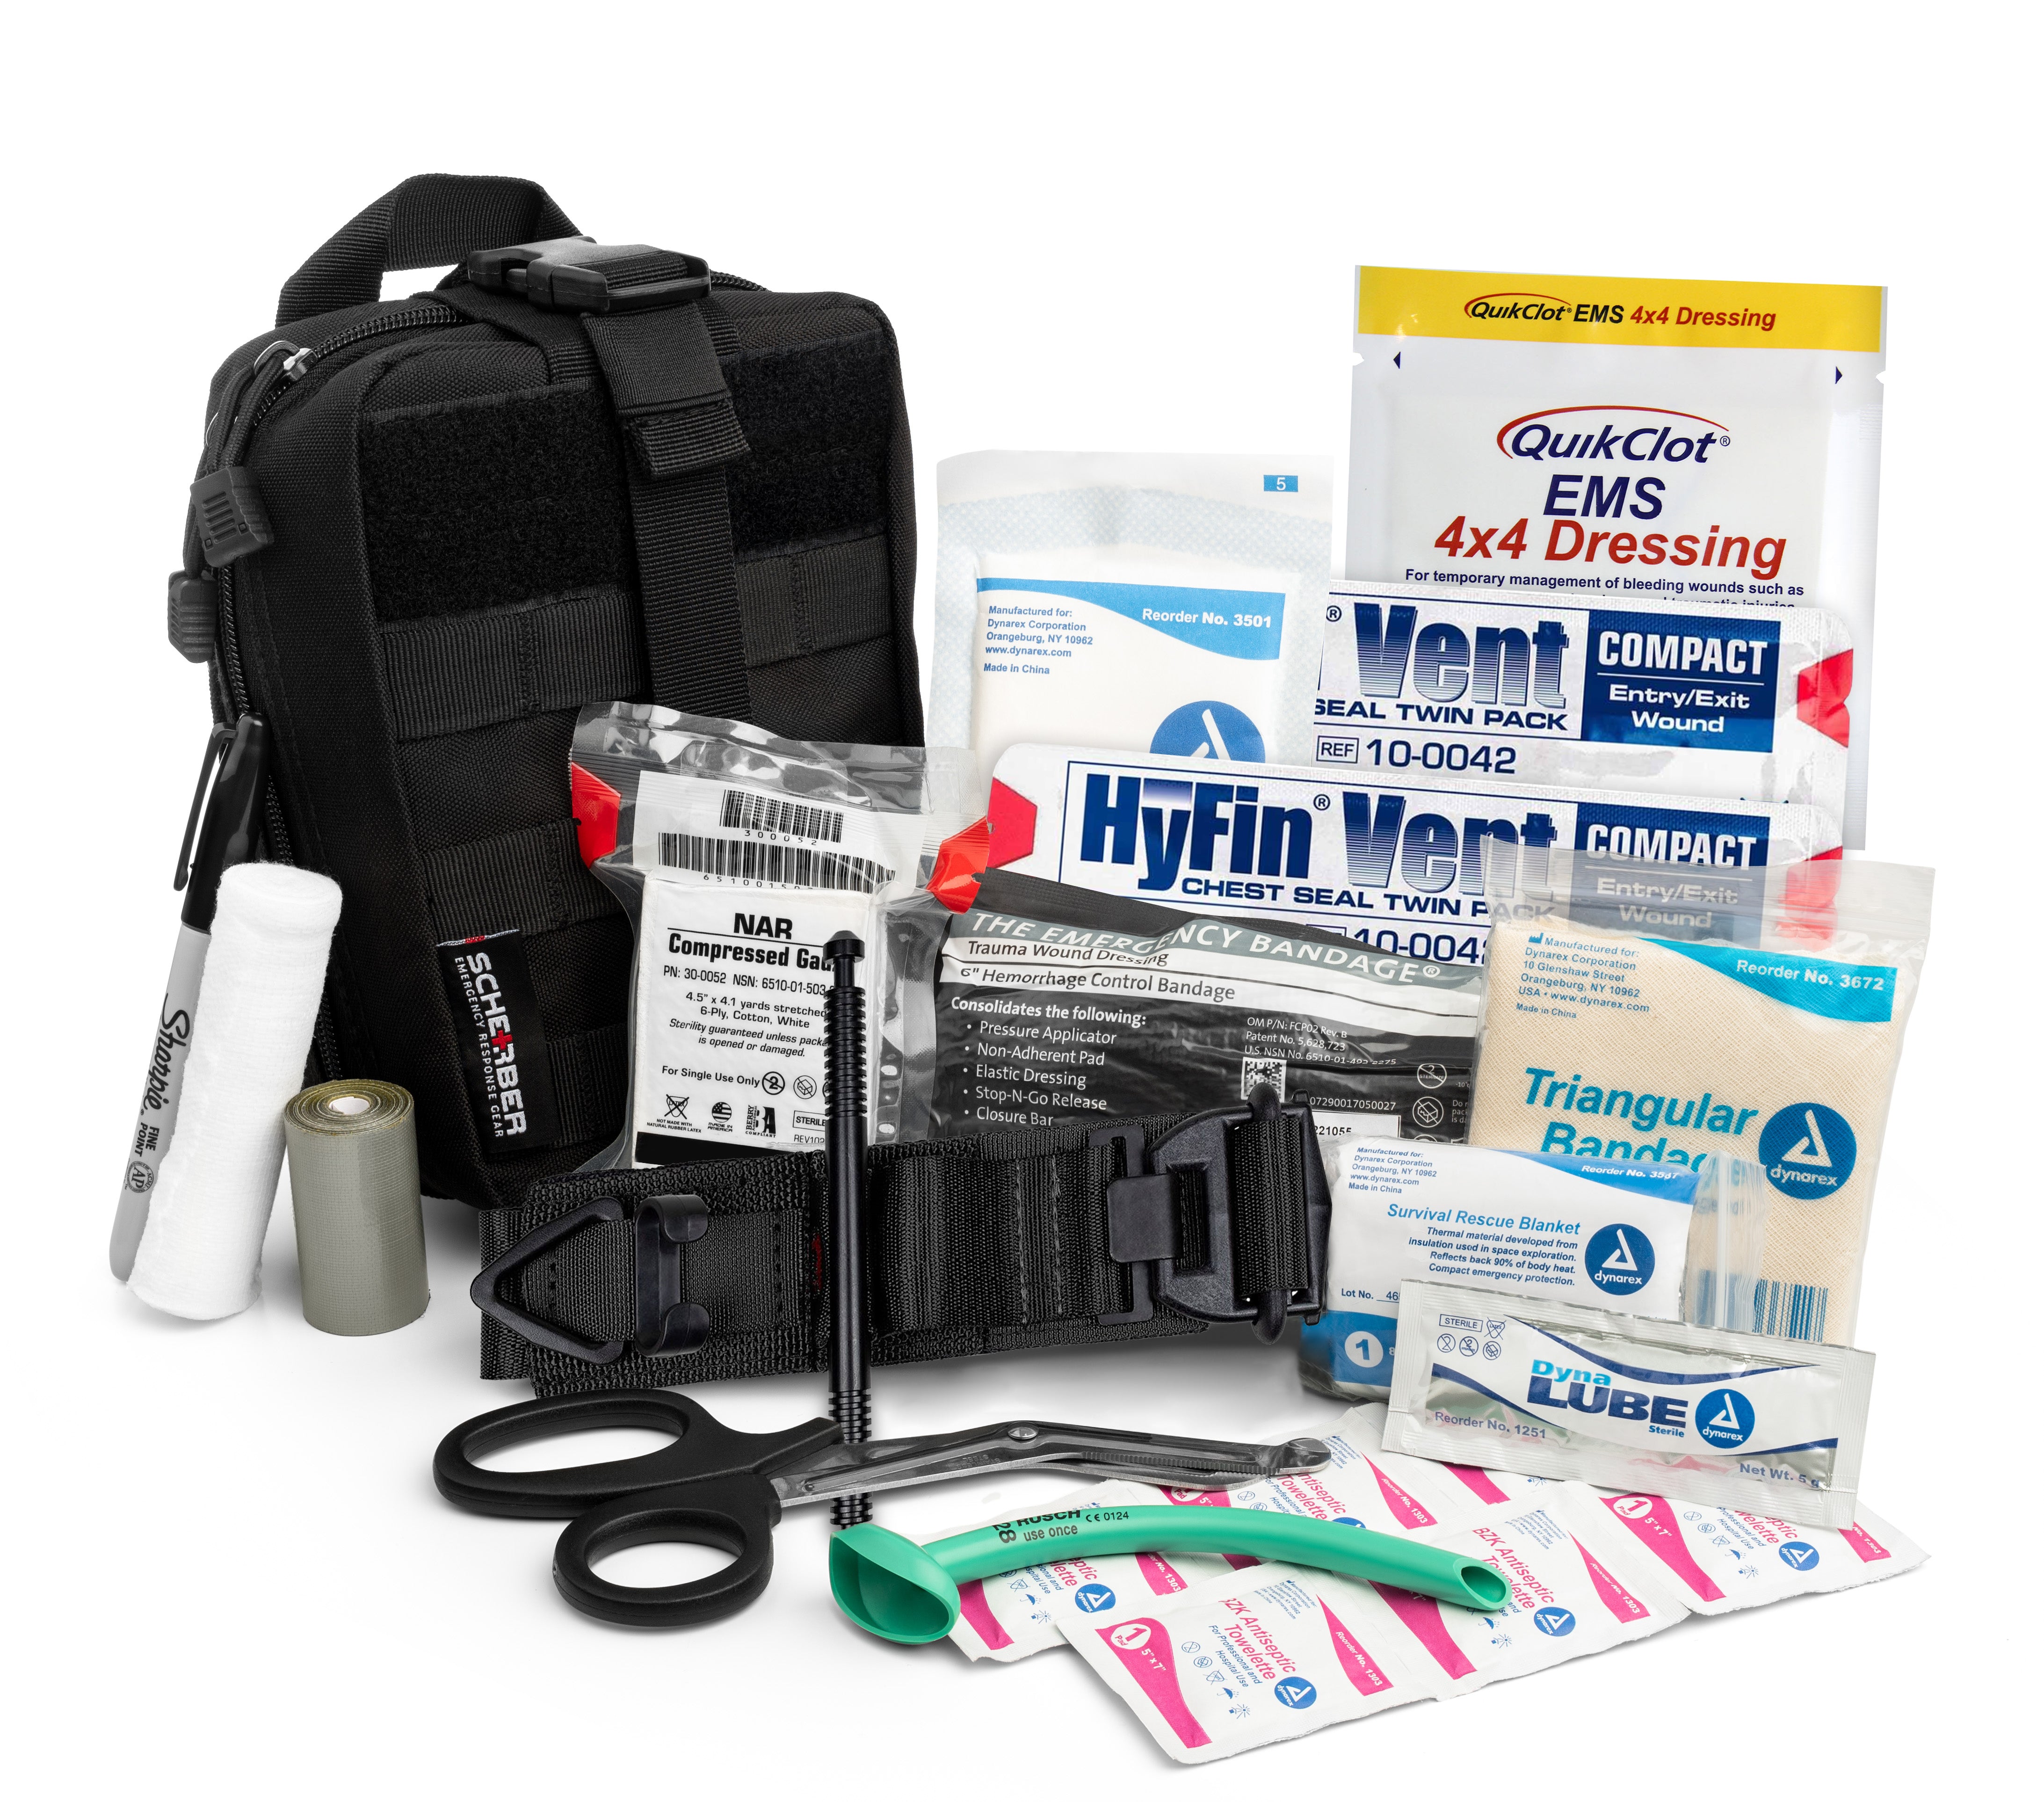 Direct Action Response Kit Pouch - Our #1 Best Selling Trauma Kit with our  Kit for Life Guarantee